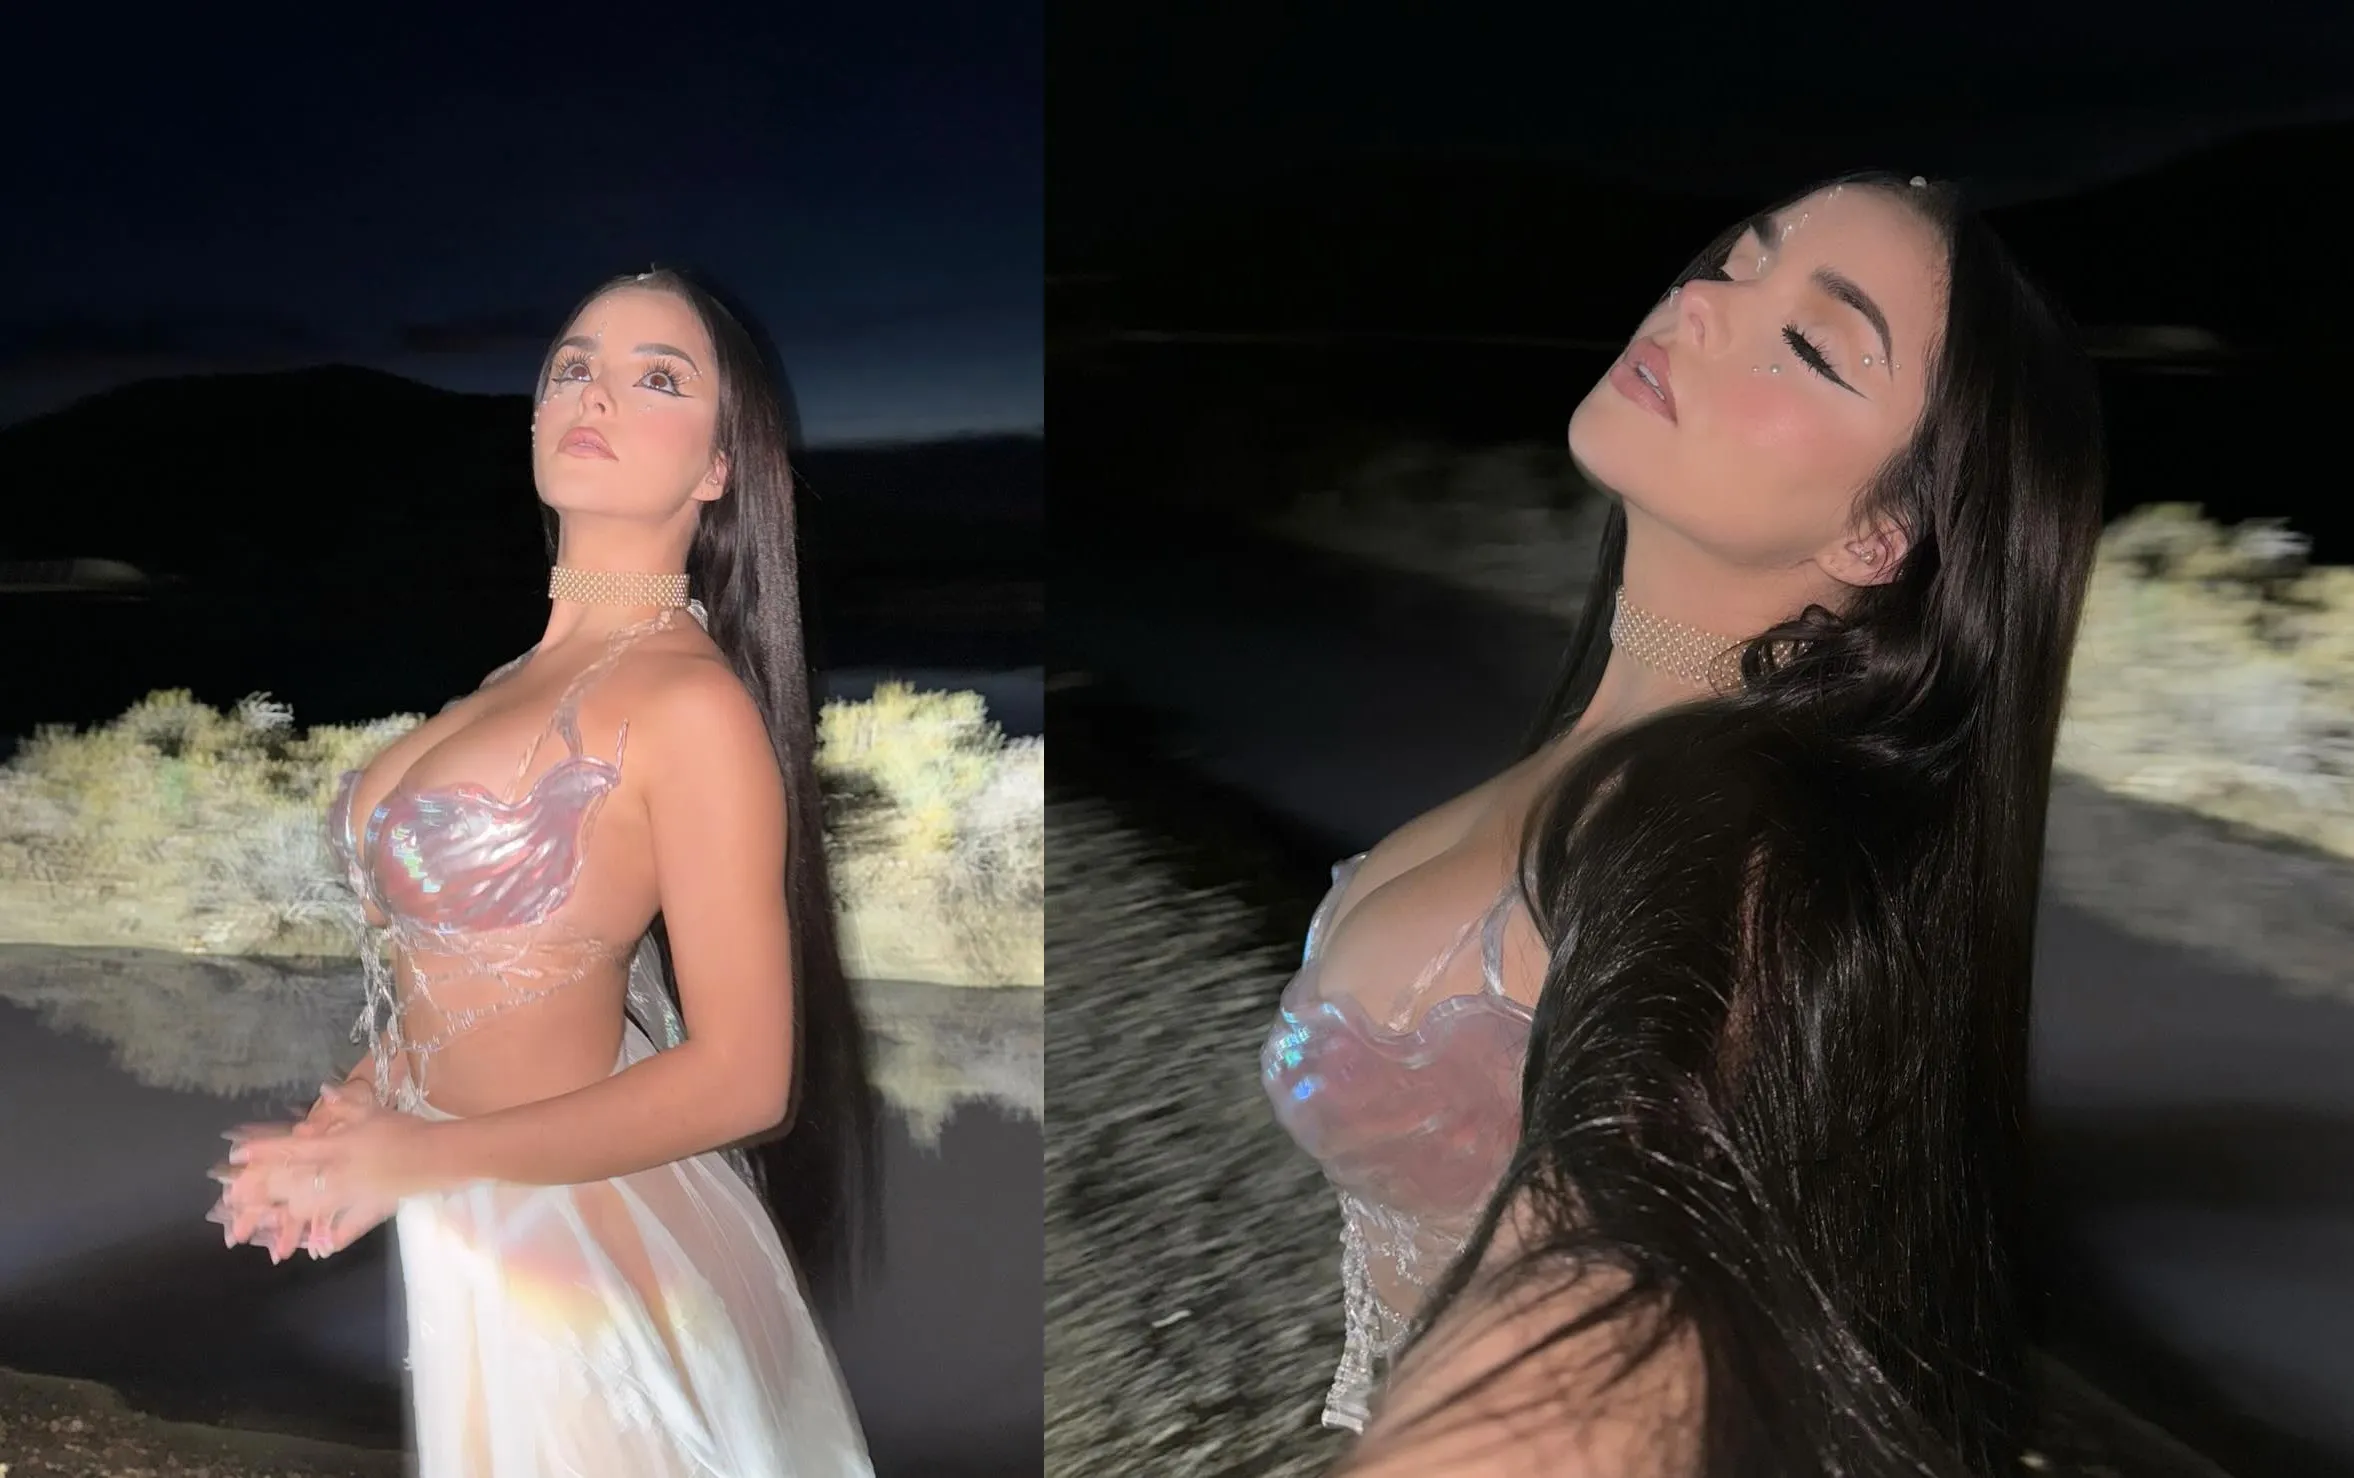 Demi rose looks stunning as she whishes a Happy new year - Gossibox.com